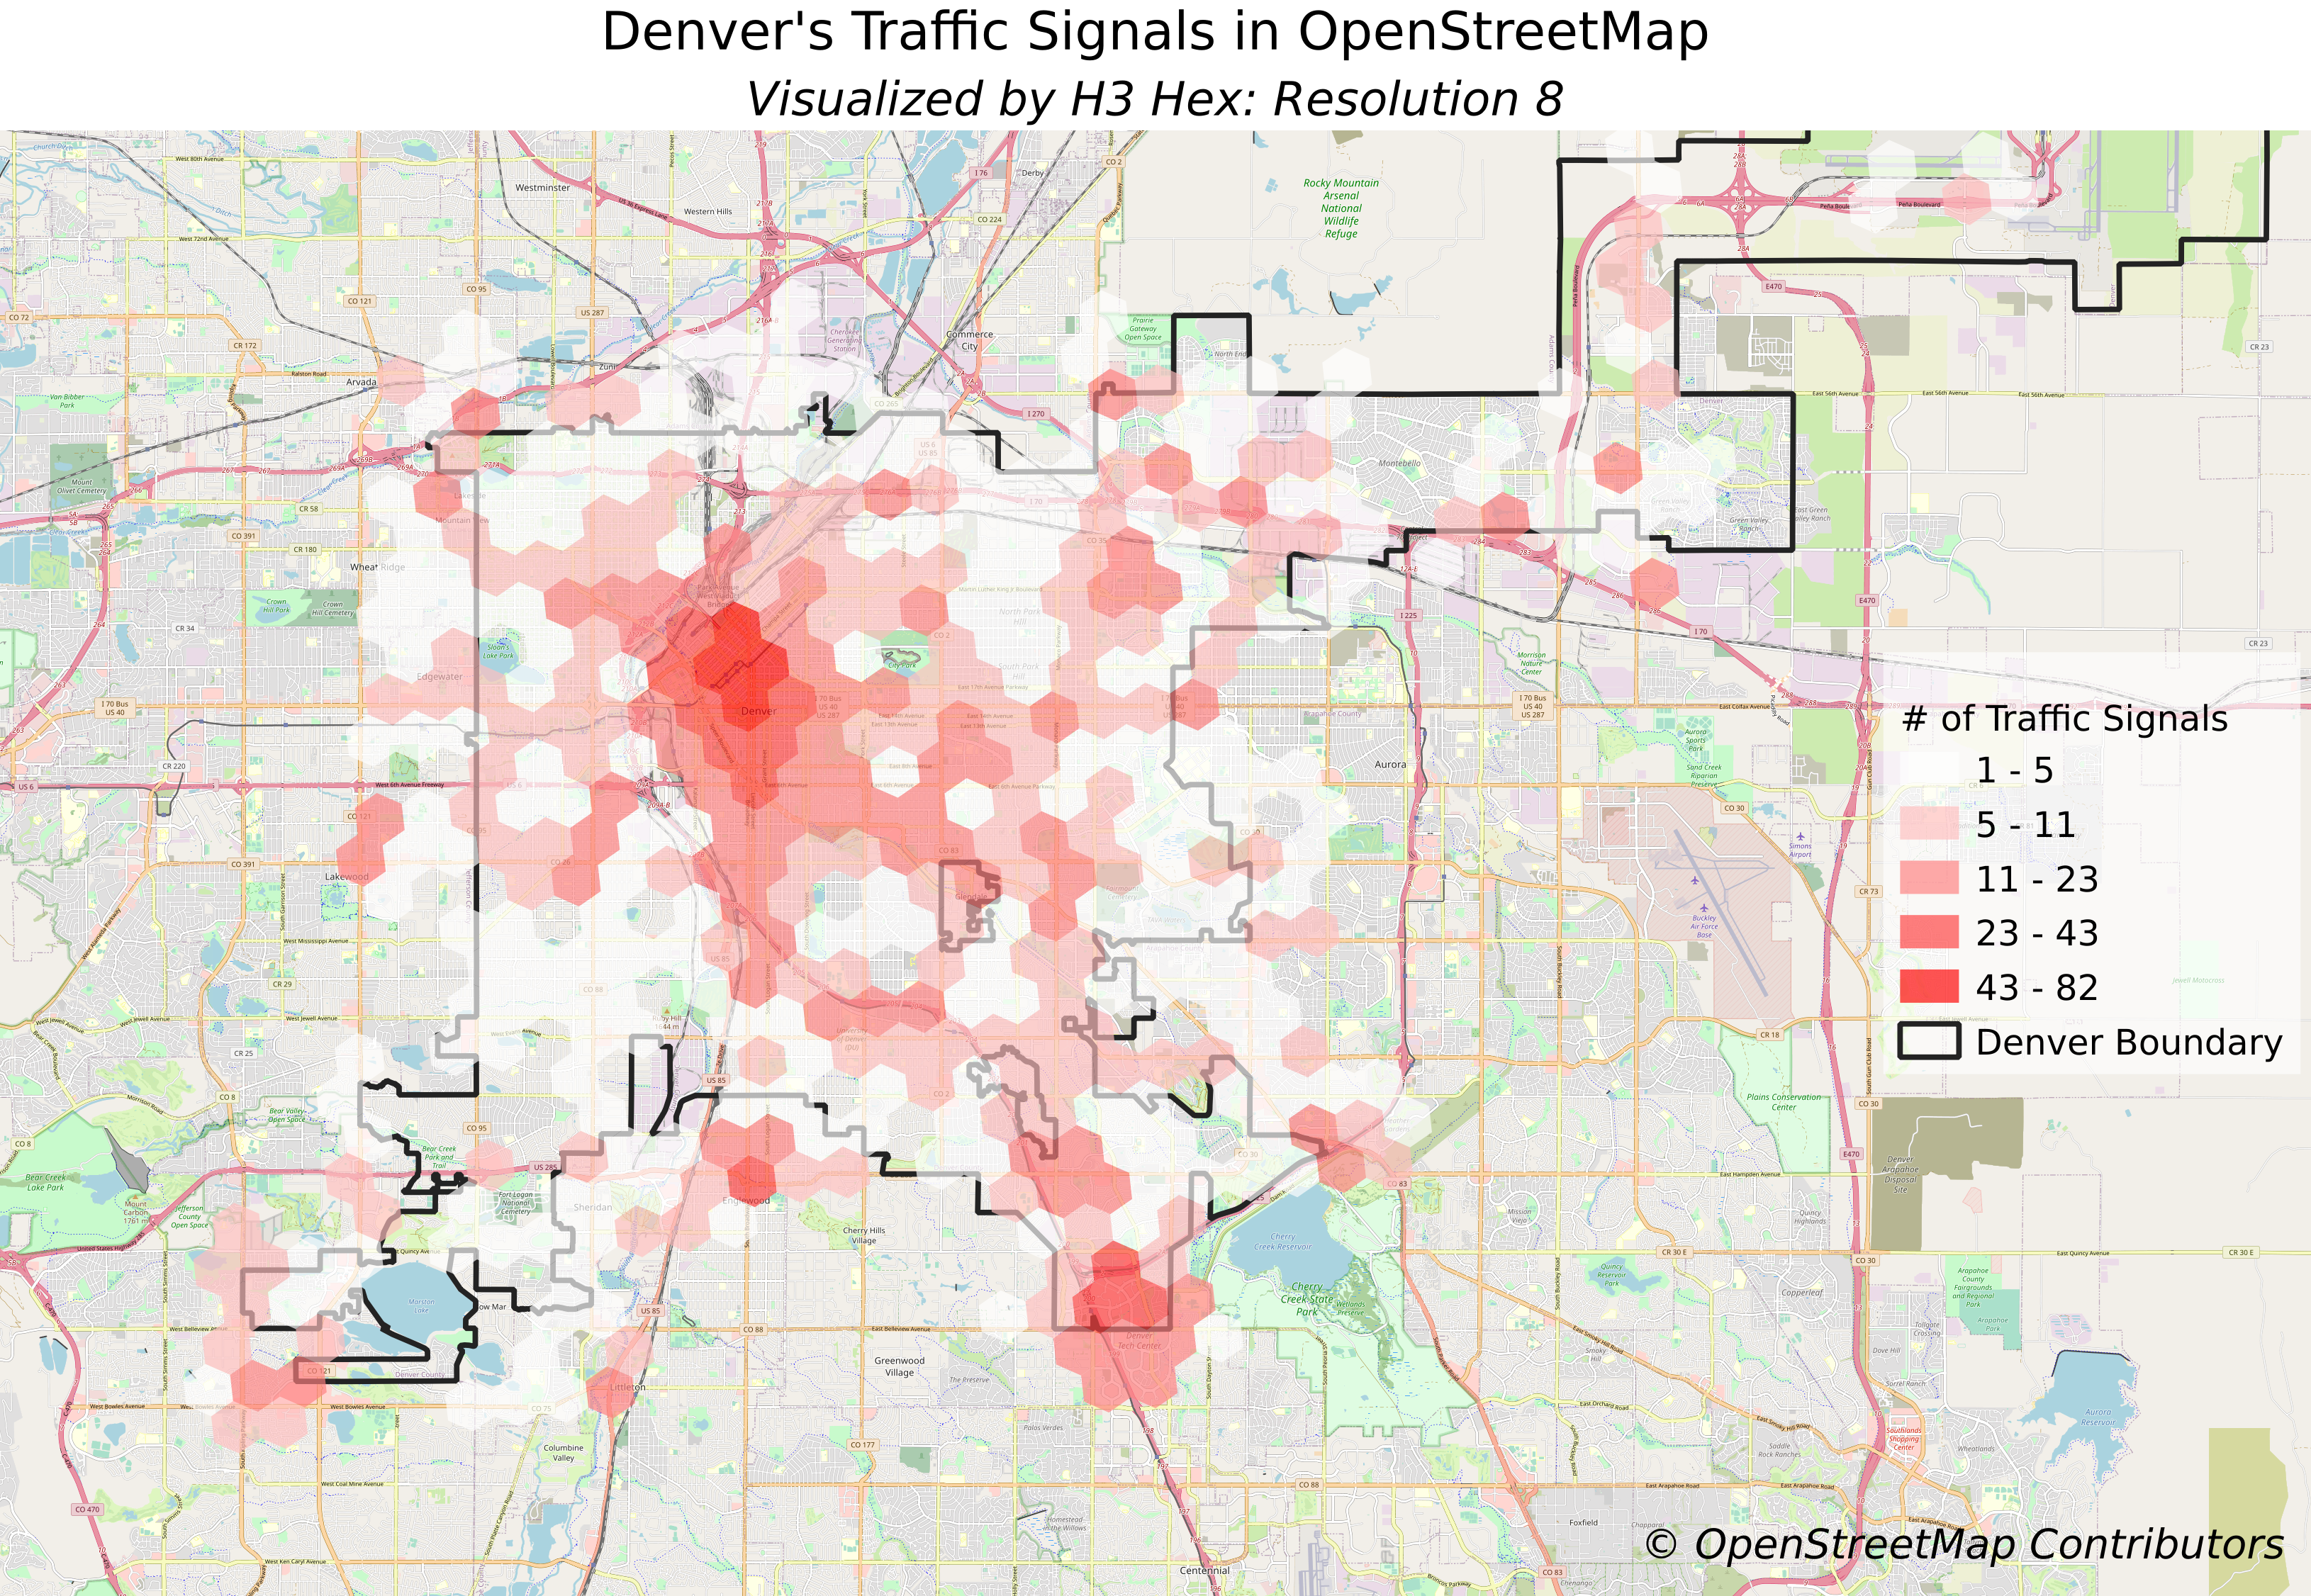 An example application of visualizing GIS data using H3 Hex - Denver traffic signals